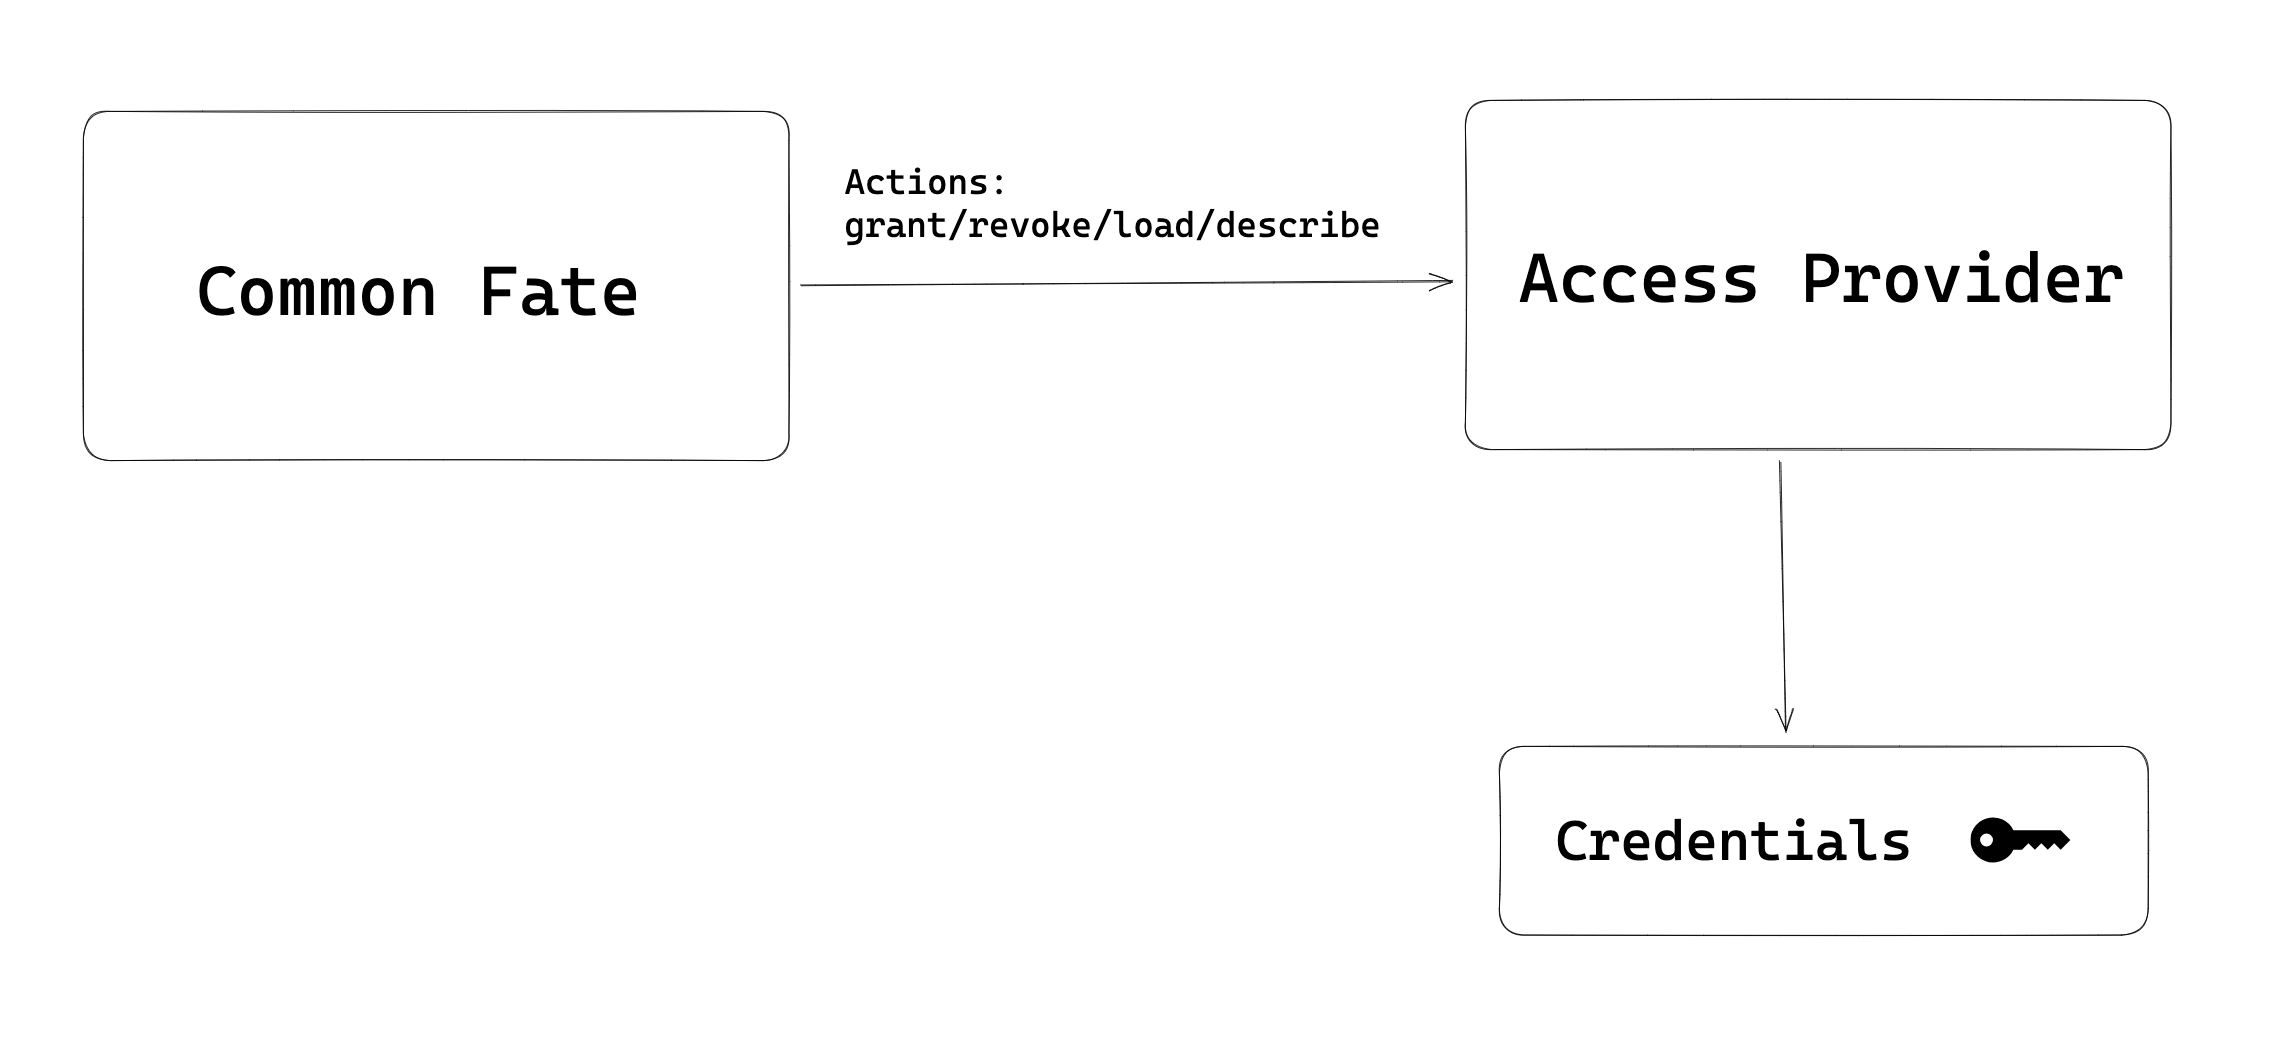 A diagram showing Common Fate connecting to an Access Provider. The connection shows Grant, Revoke, Load, and Describe as available API calls